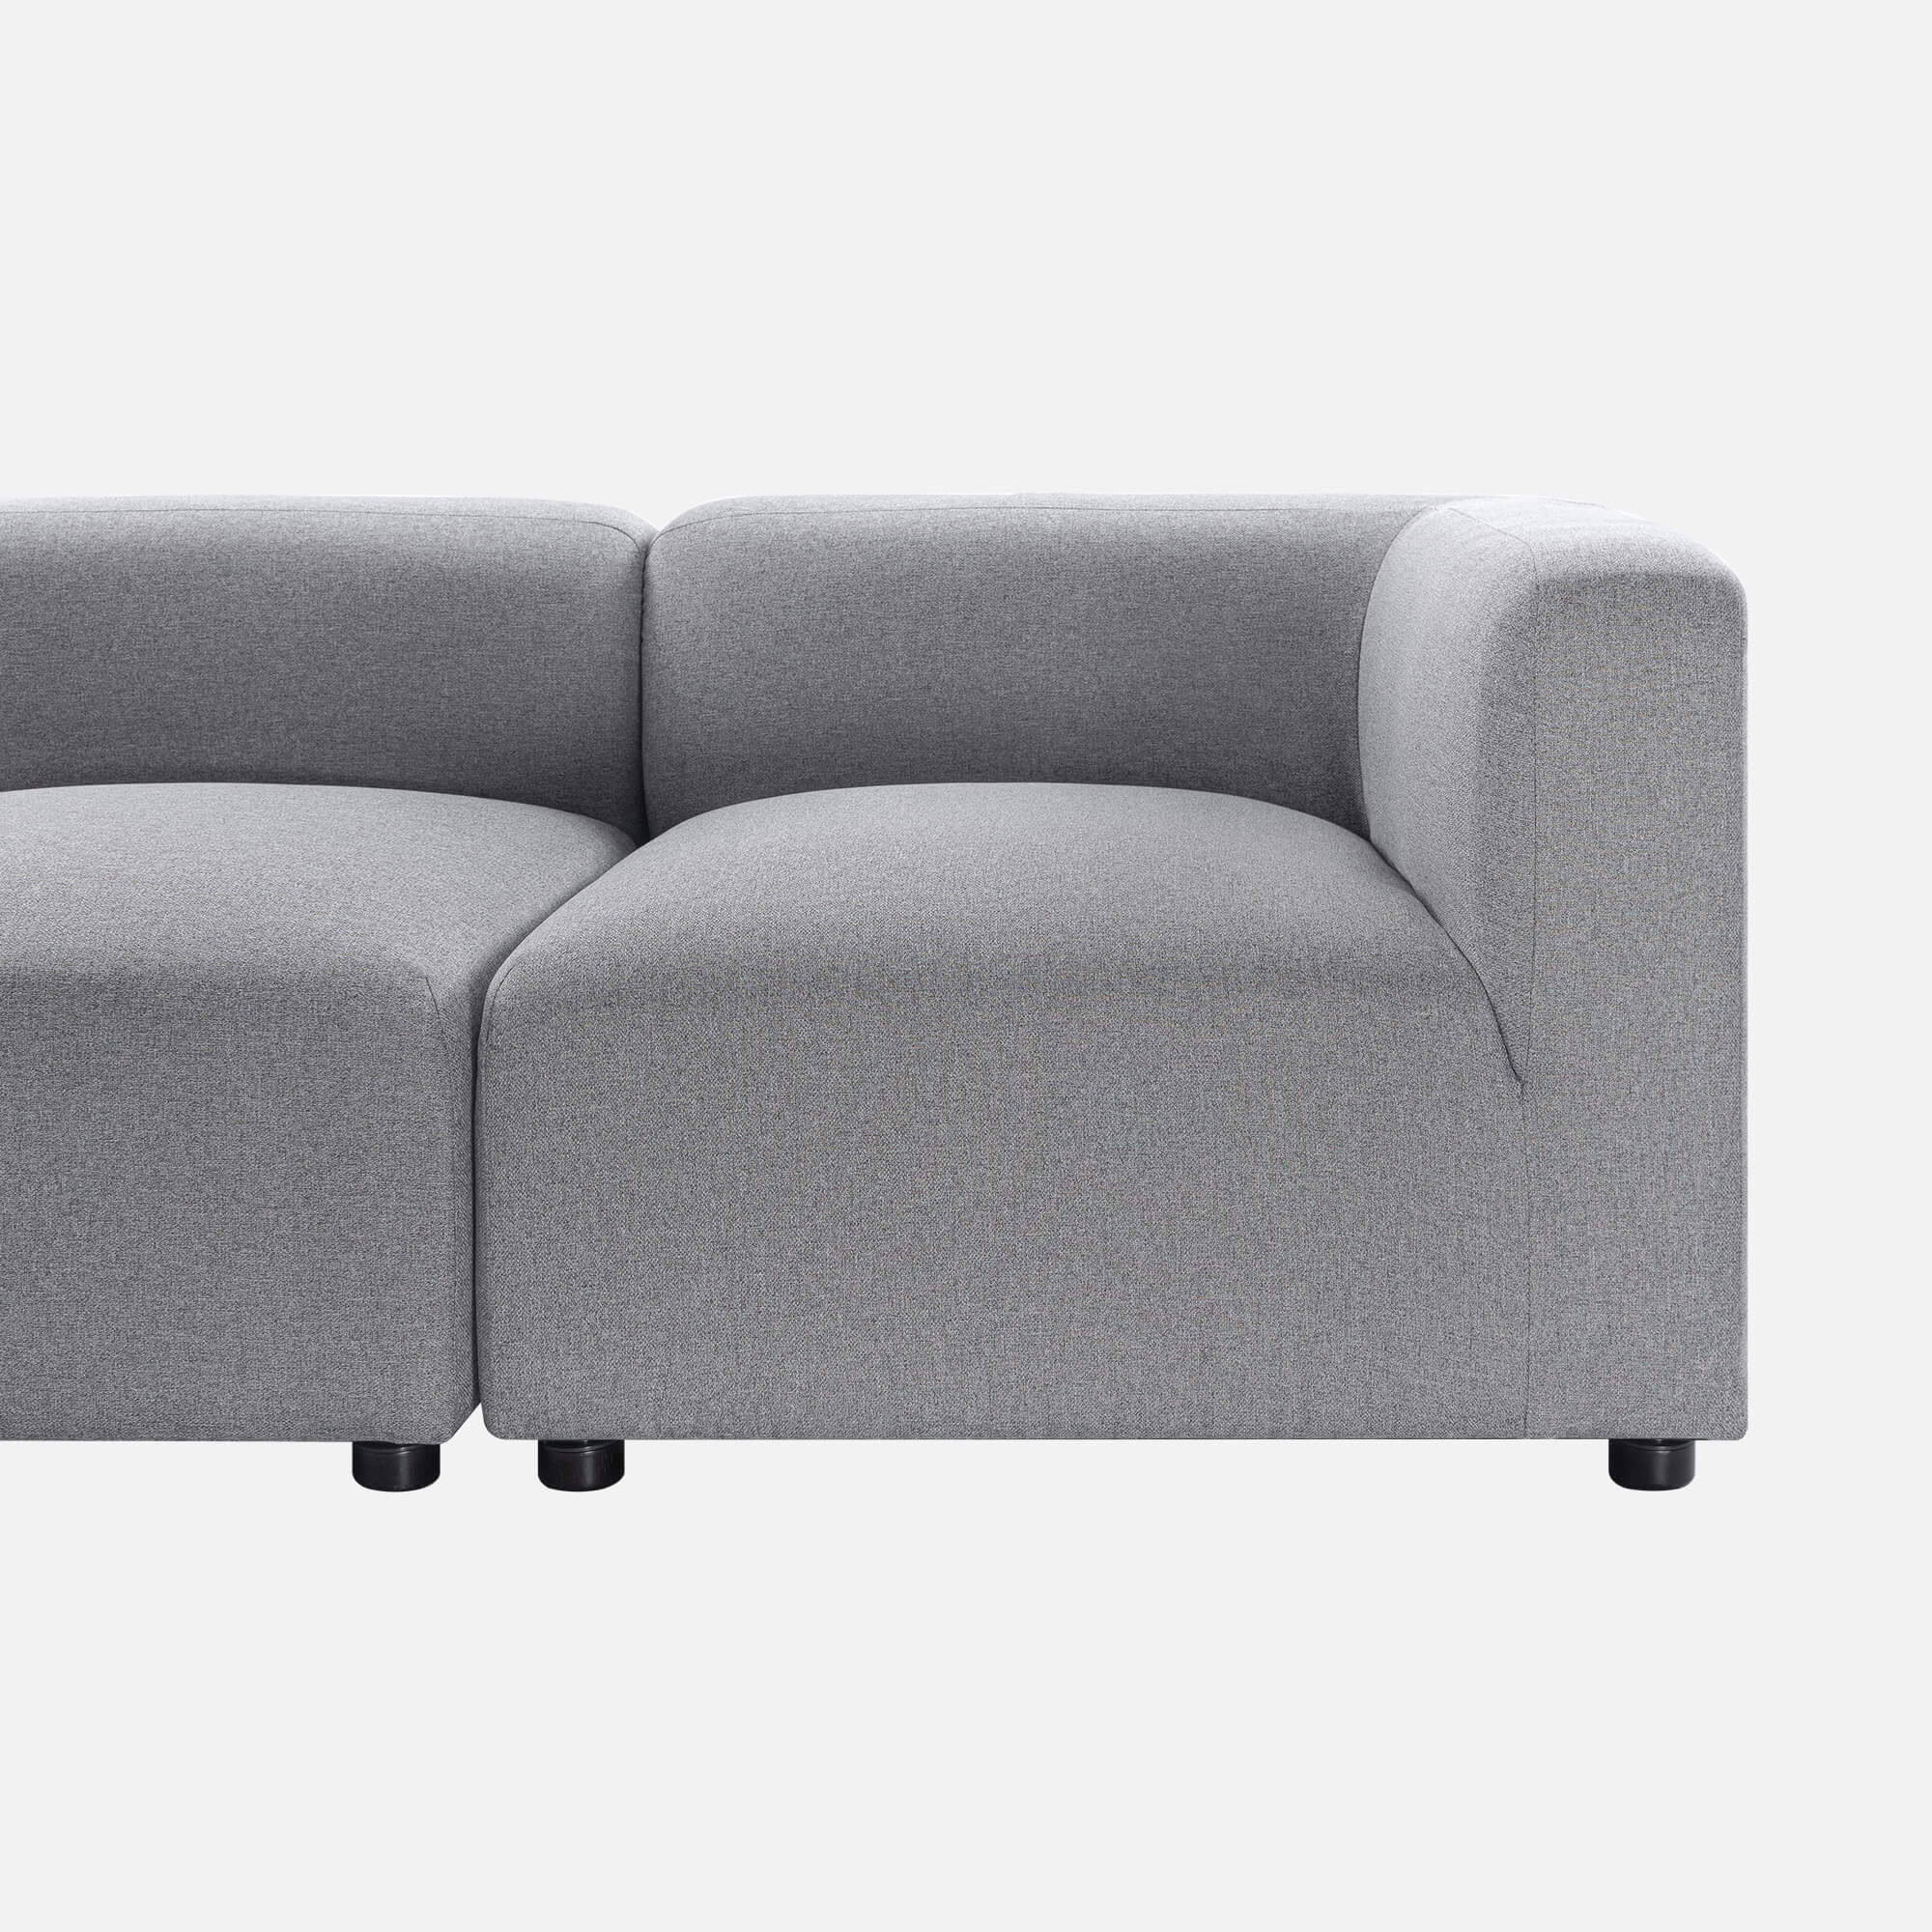 Luca Double Chaise Sectional Sofa